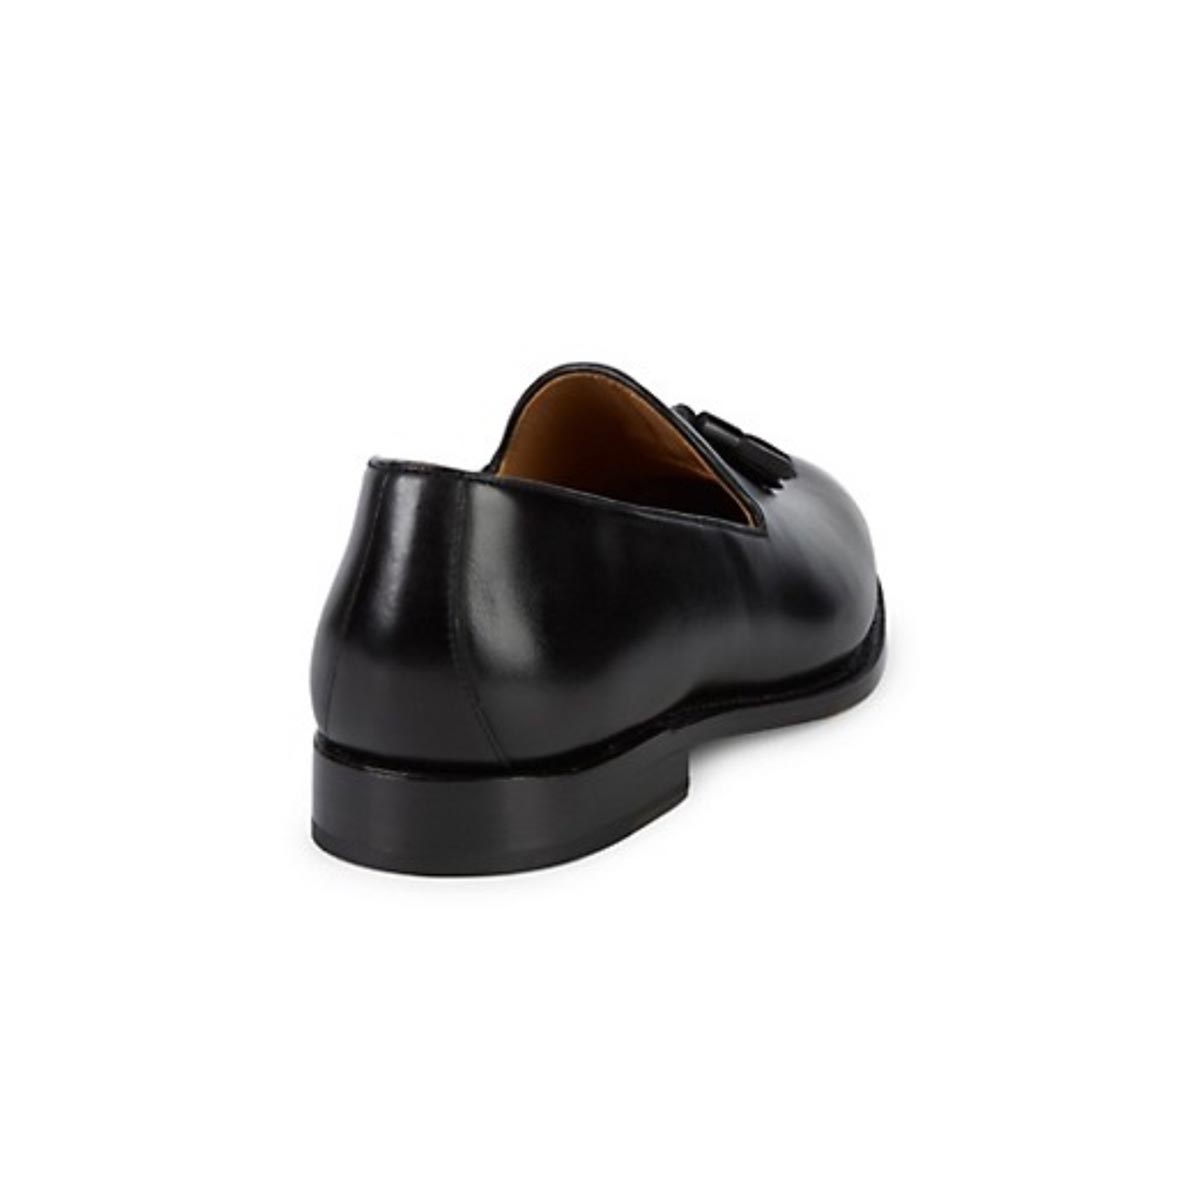 Dino | Loafers | Buy Now | Nettleton Shoes since 1879